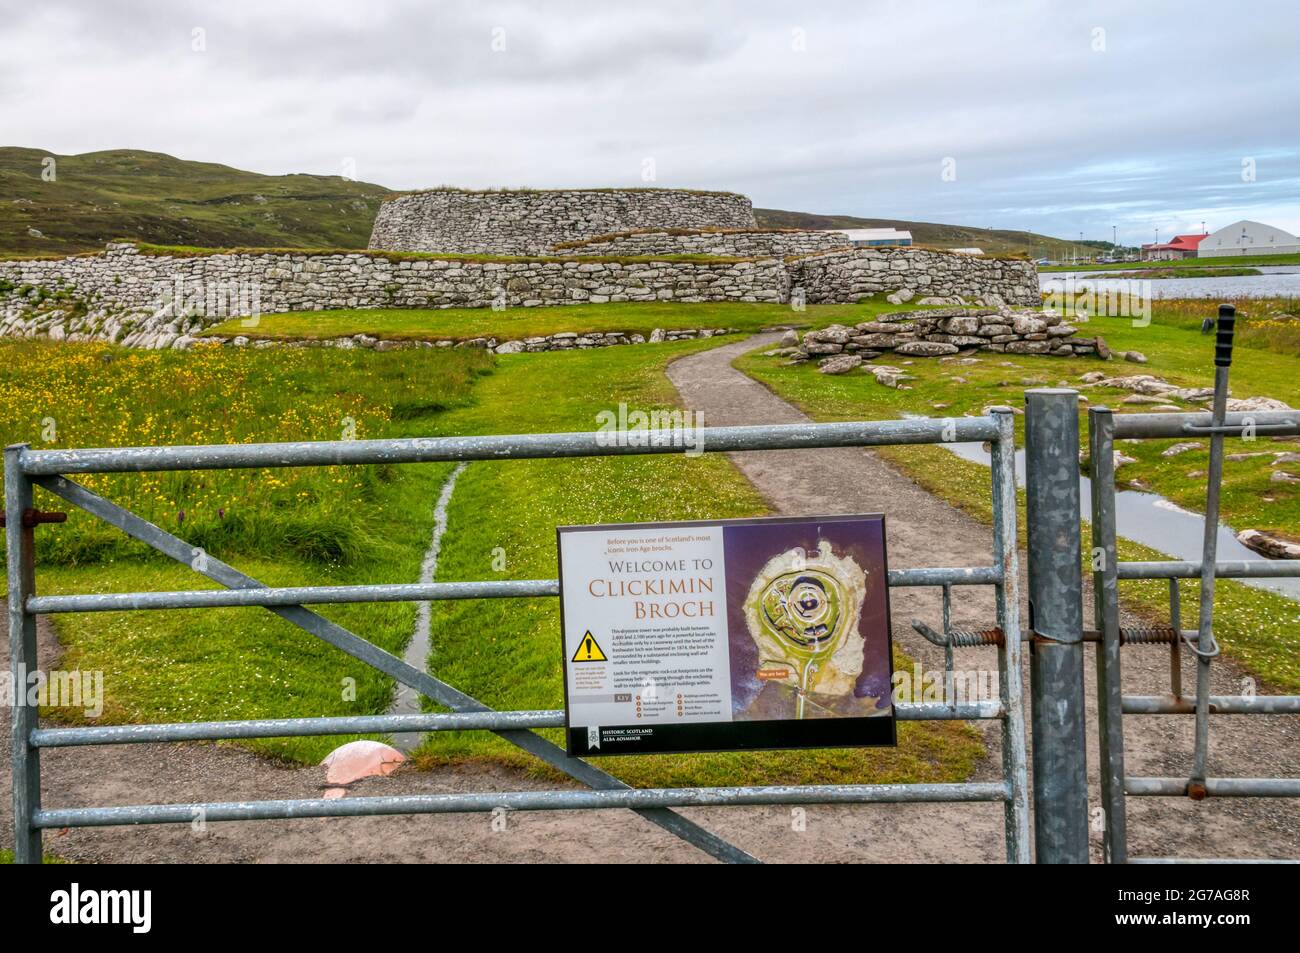 A welcome sign at the entrance to Clickimin Broch on south shore of Clickimin Loch, Lerwick, Shetland. Stock Photo